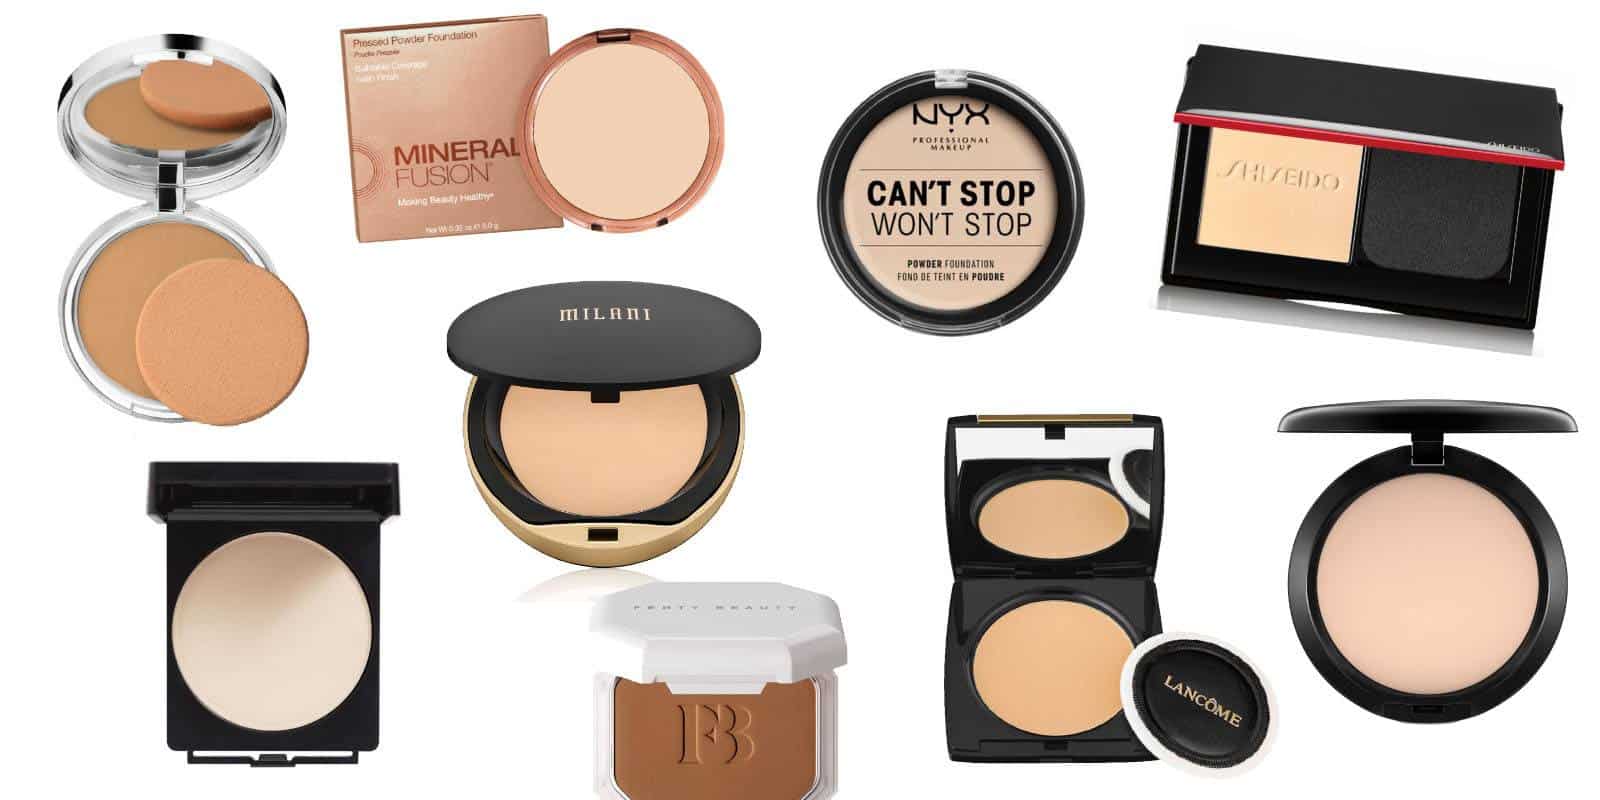 The Best Powder Foundation for Oily Skin